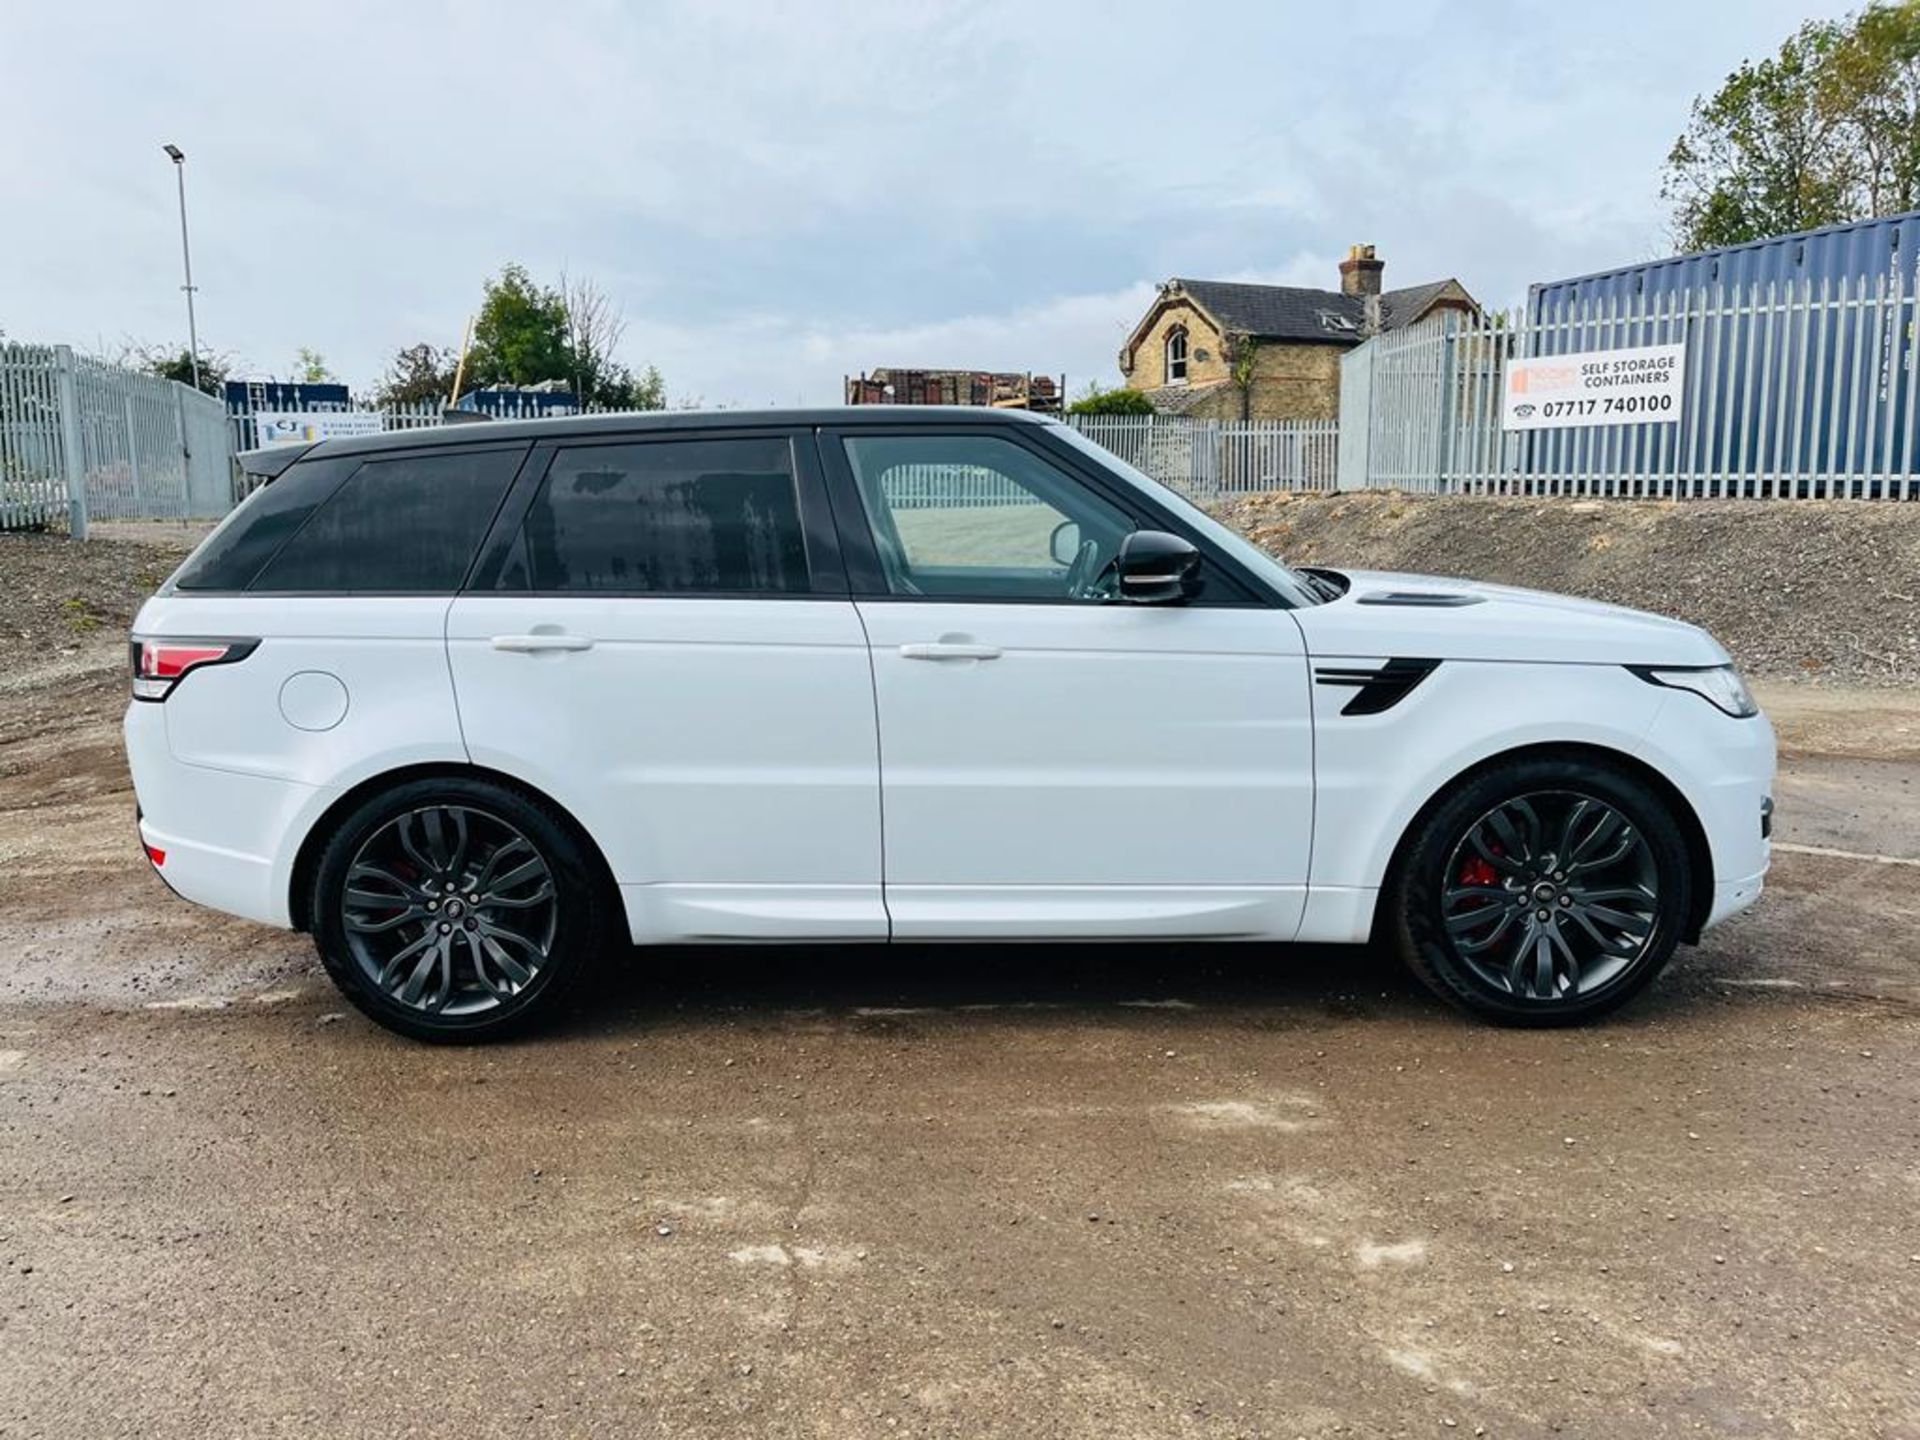 ** ON SALE ** Land Rover Range Rover Sport 3.0 SDV6 306 HSE DYNAMIC 4WD 2017 (66 Reg) - A/C - Image 3 of 32